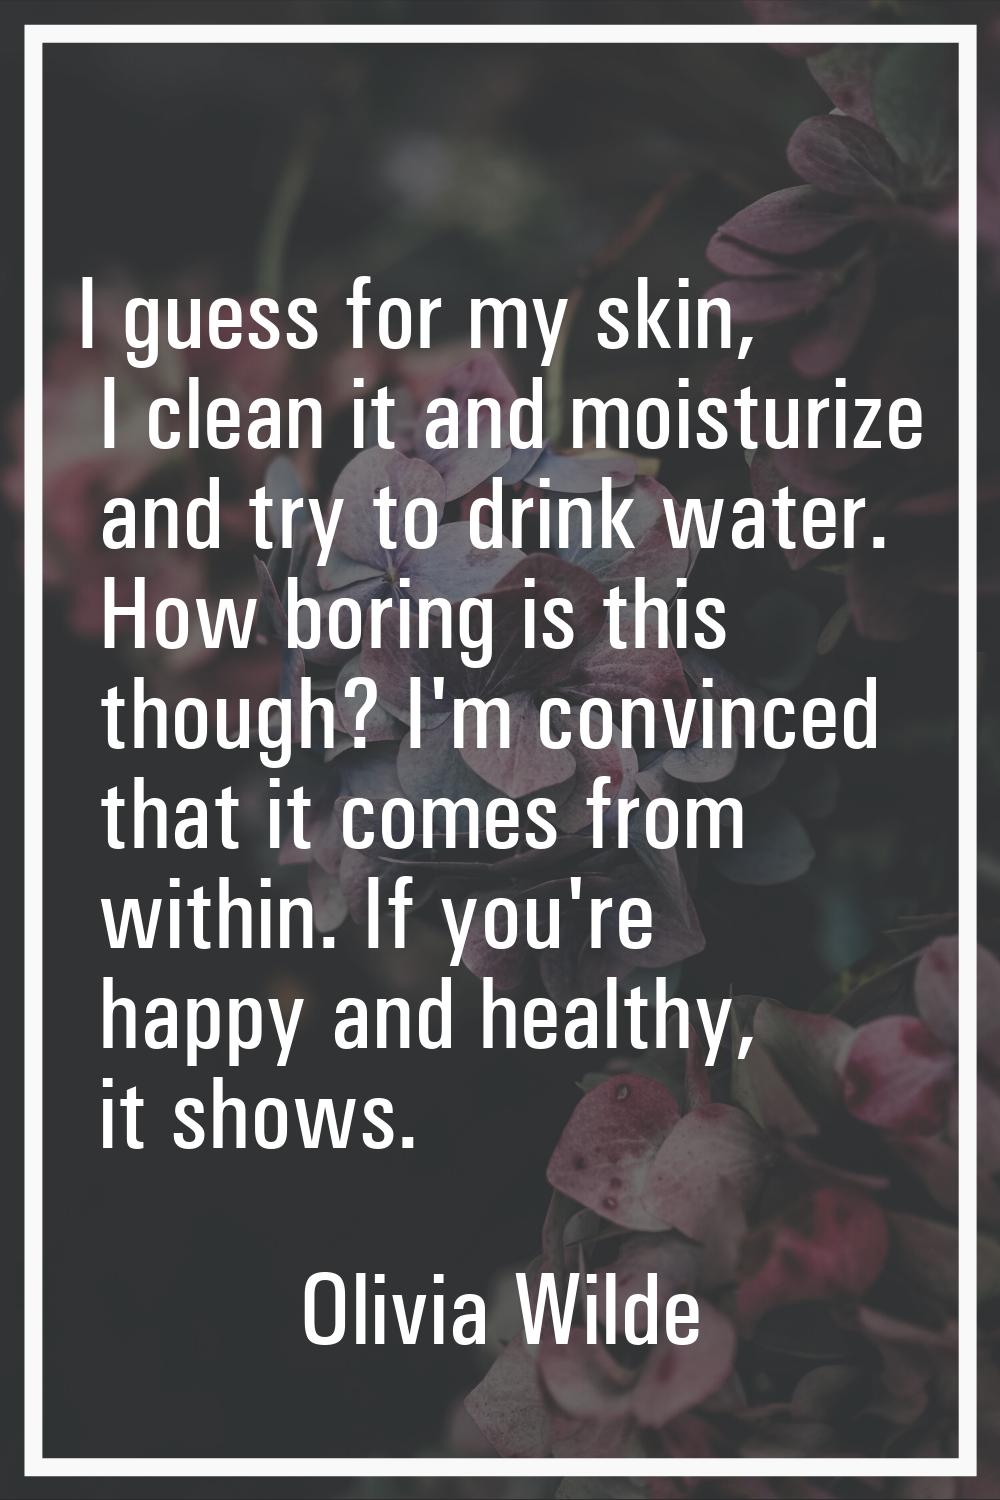 I guess for my skin, I clean it and moisturize and try to drink water. How boring is this though? I